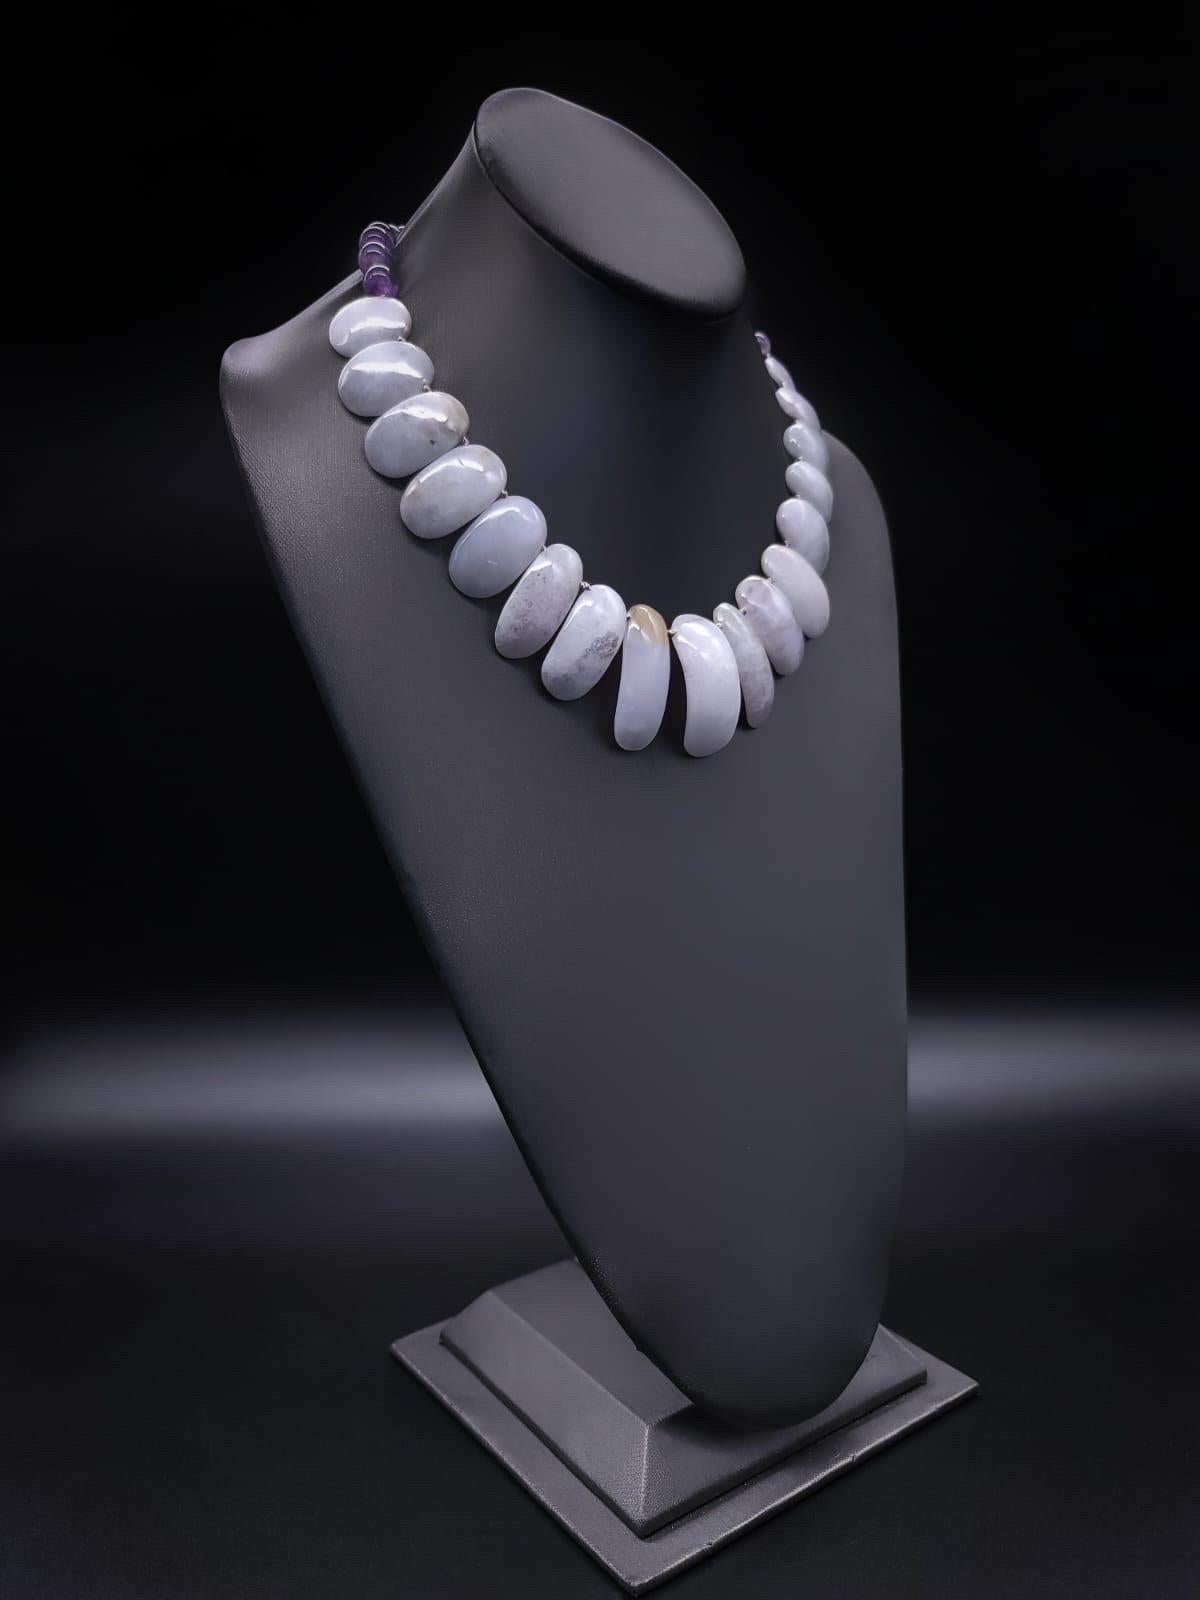 One-of-a-Kind


“The stone of the Angels”…  Lavender Jade imported to China from Burma (Myanmar) in the early 1800”s and highly desirable once introduced is the centerpiece of this lovely softly colored necklace containing 3 different desirable